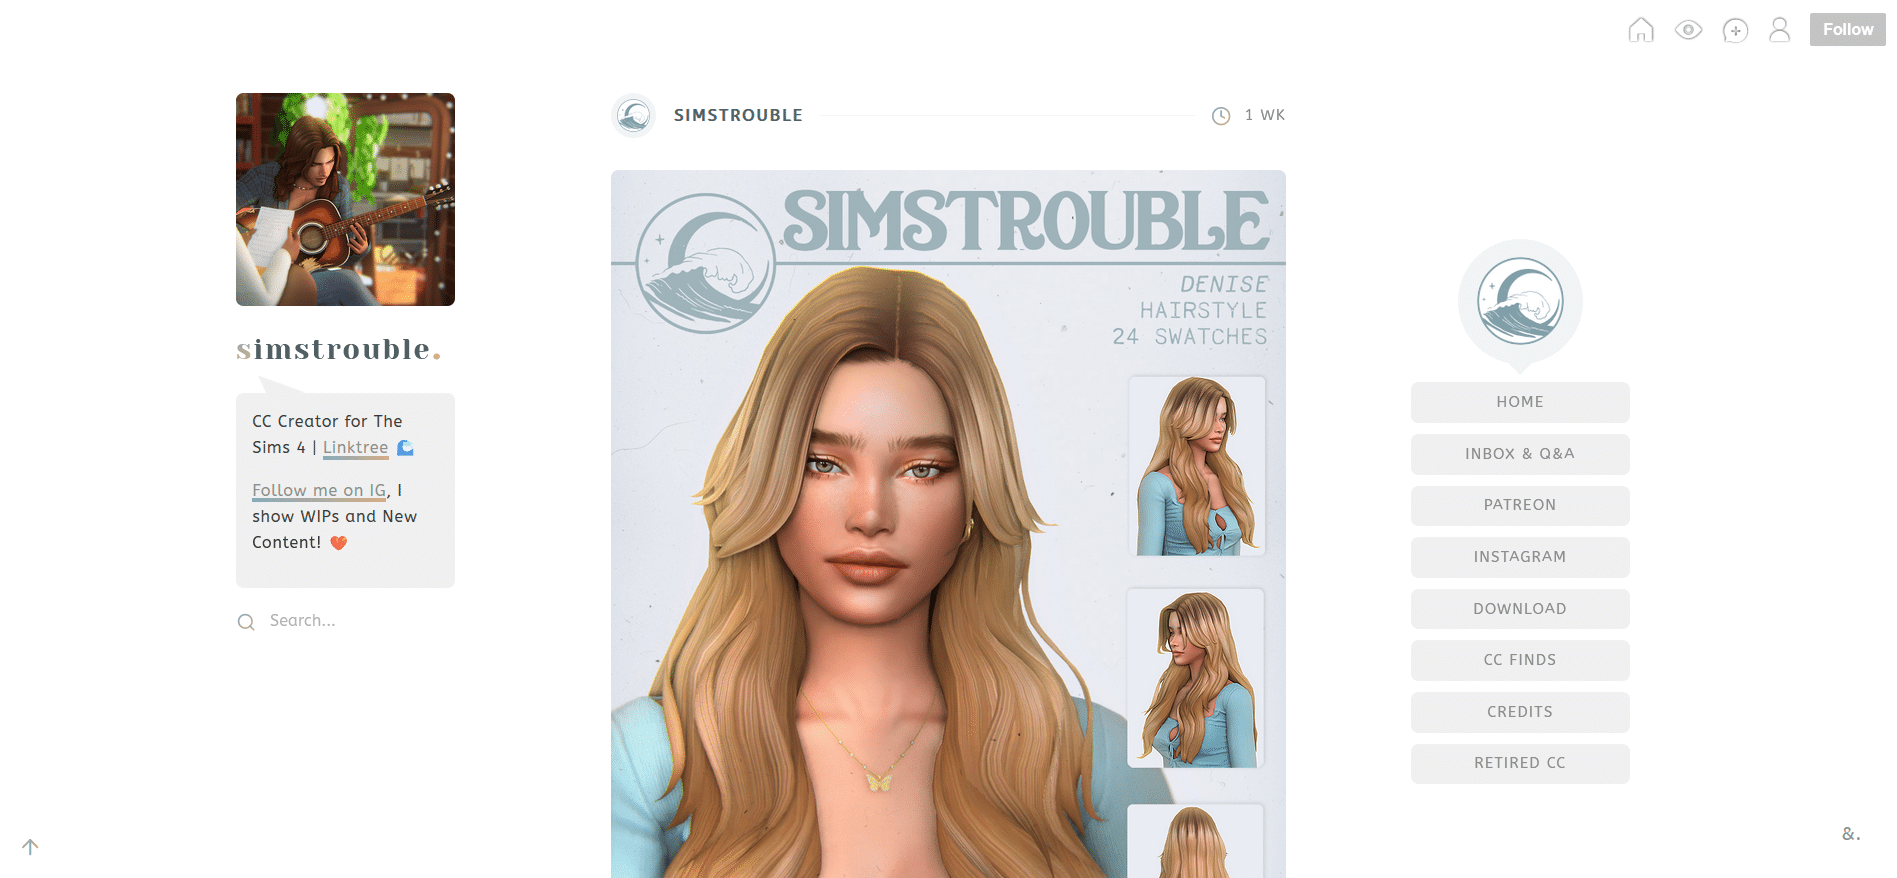 Simstrouble